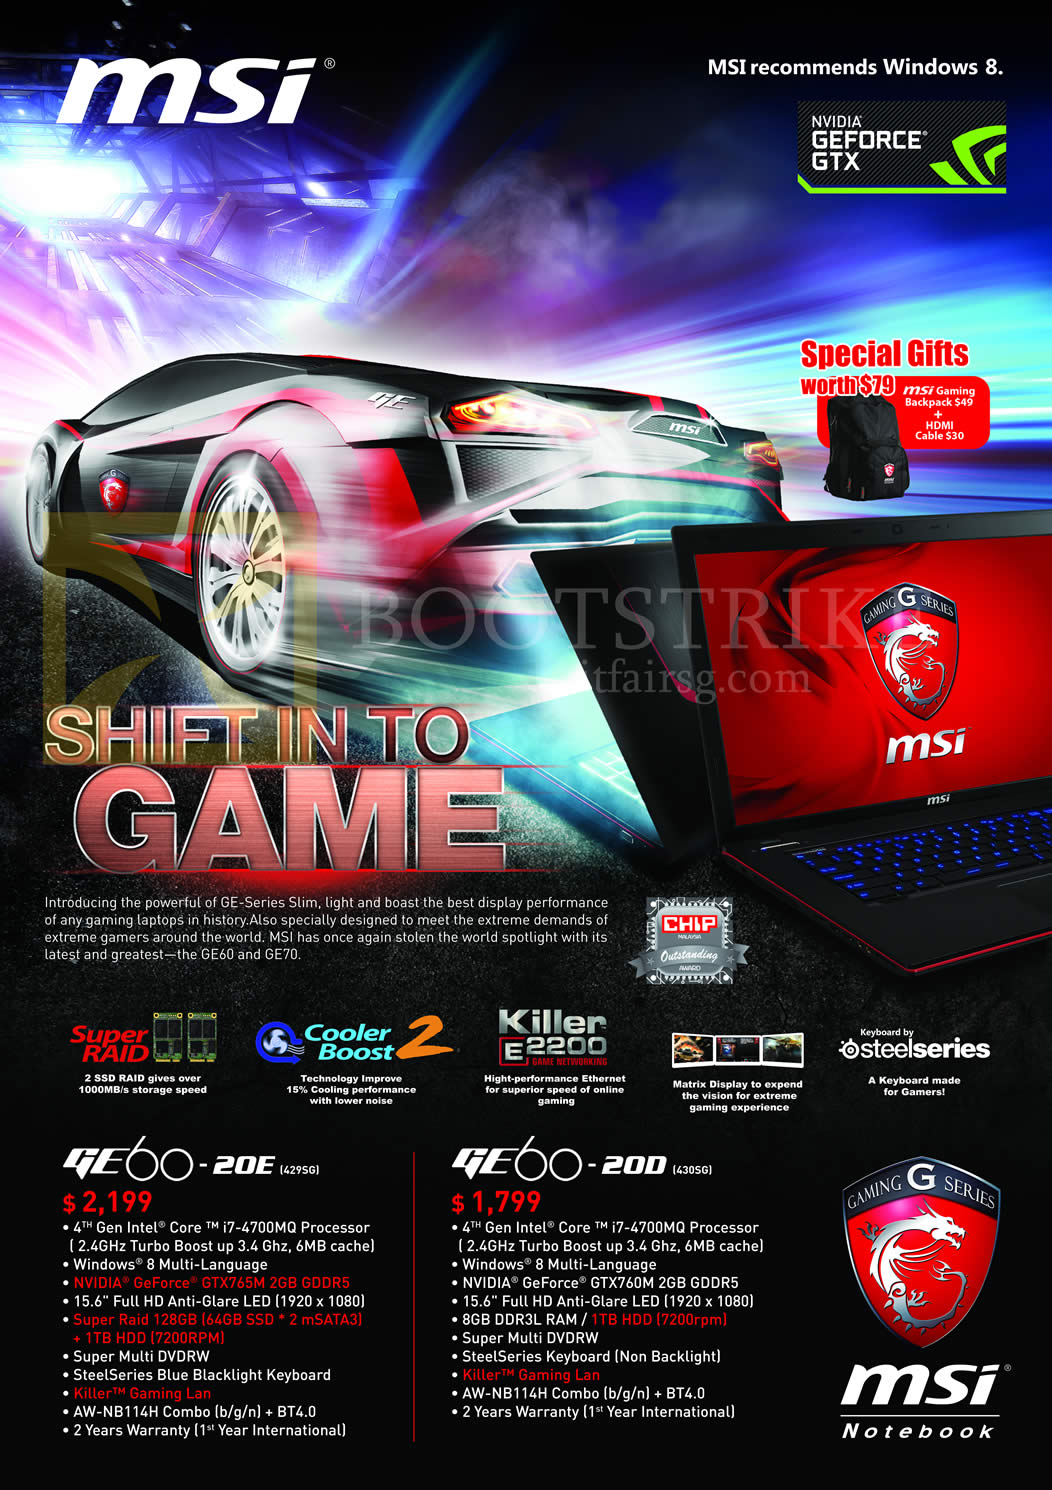 SITEX 2013 price list image brochure of MSI Notebooks Gaming GE60-20E, GE60-20D